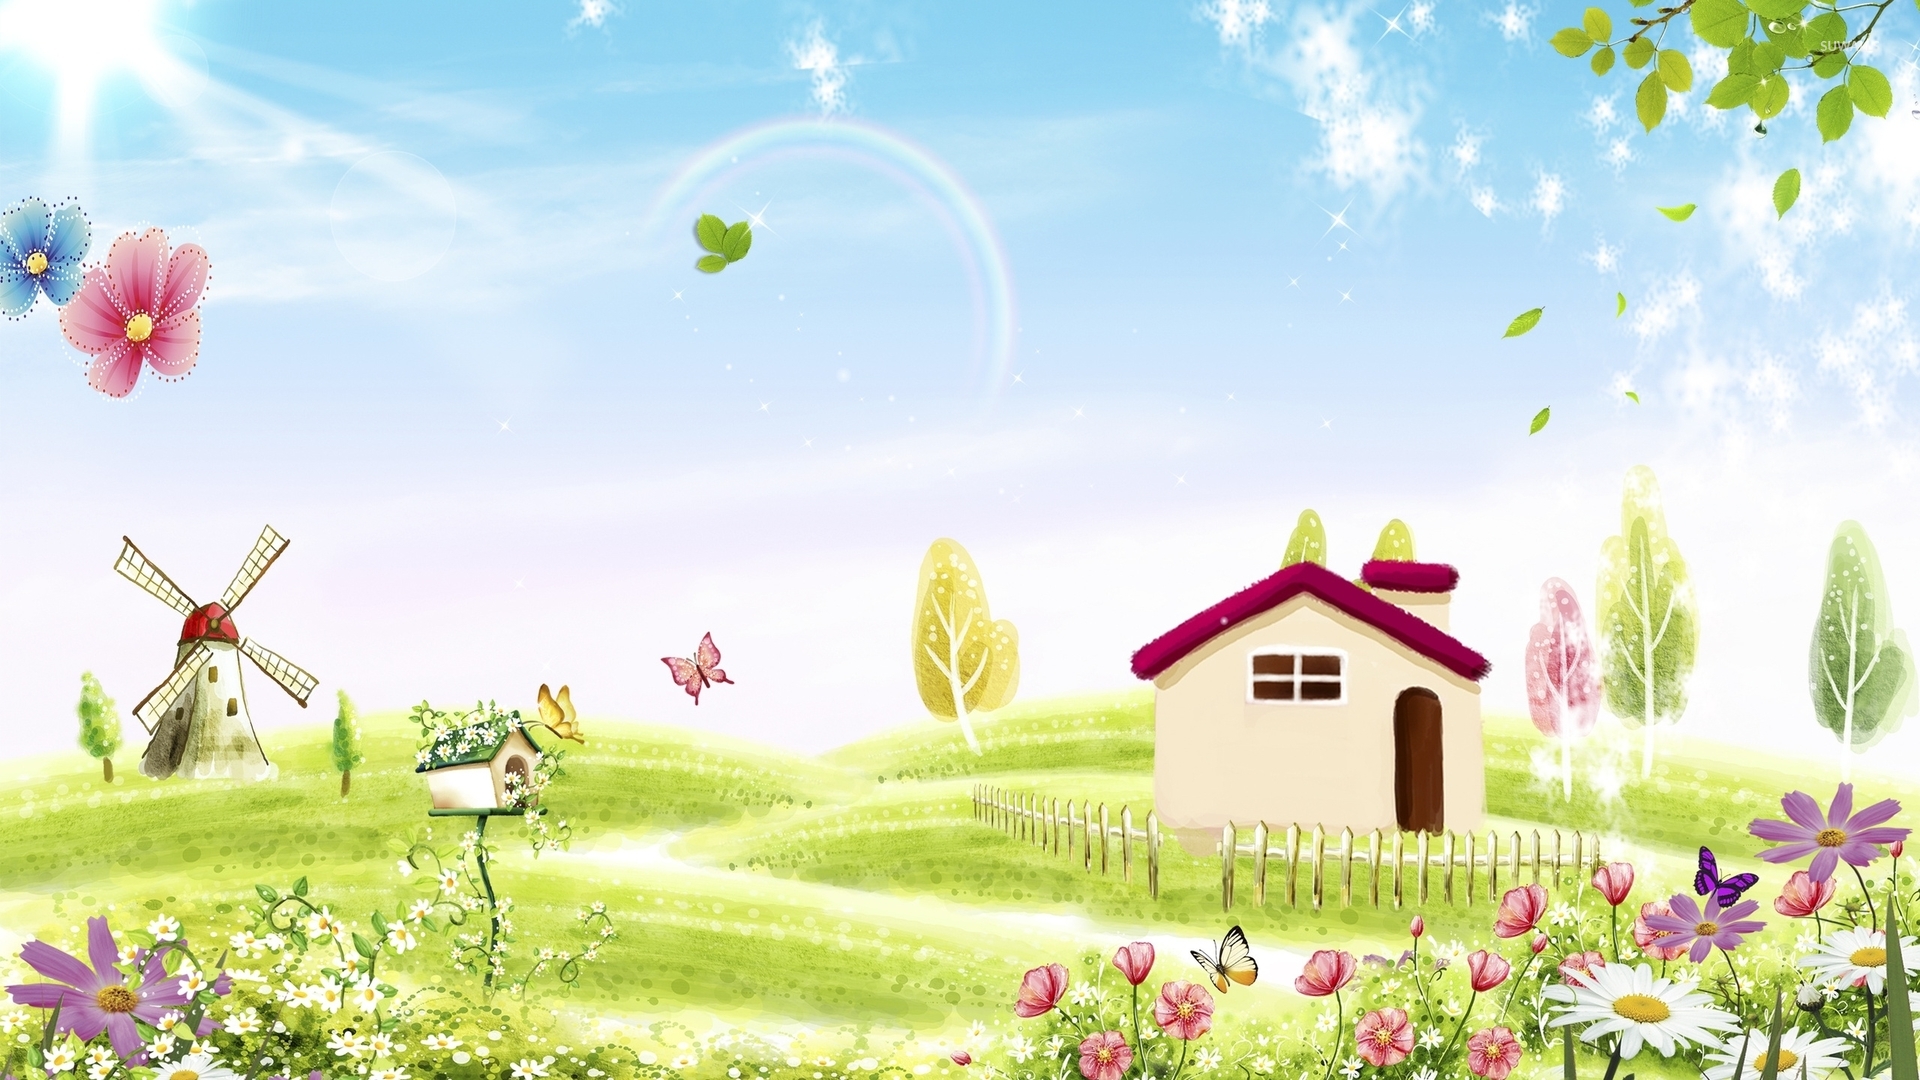 Amazing Spring Nature By The Small House Wallpaper